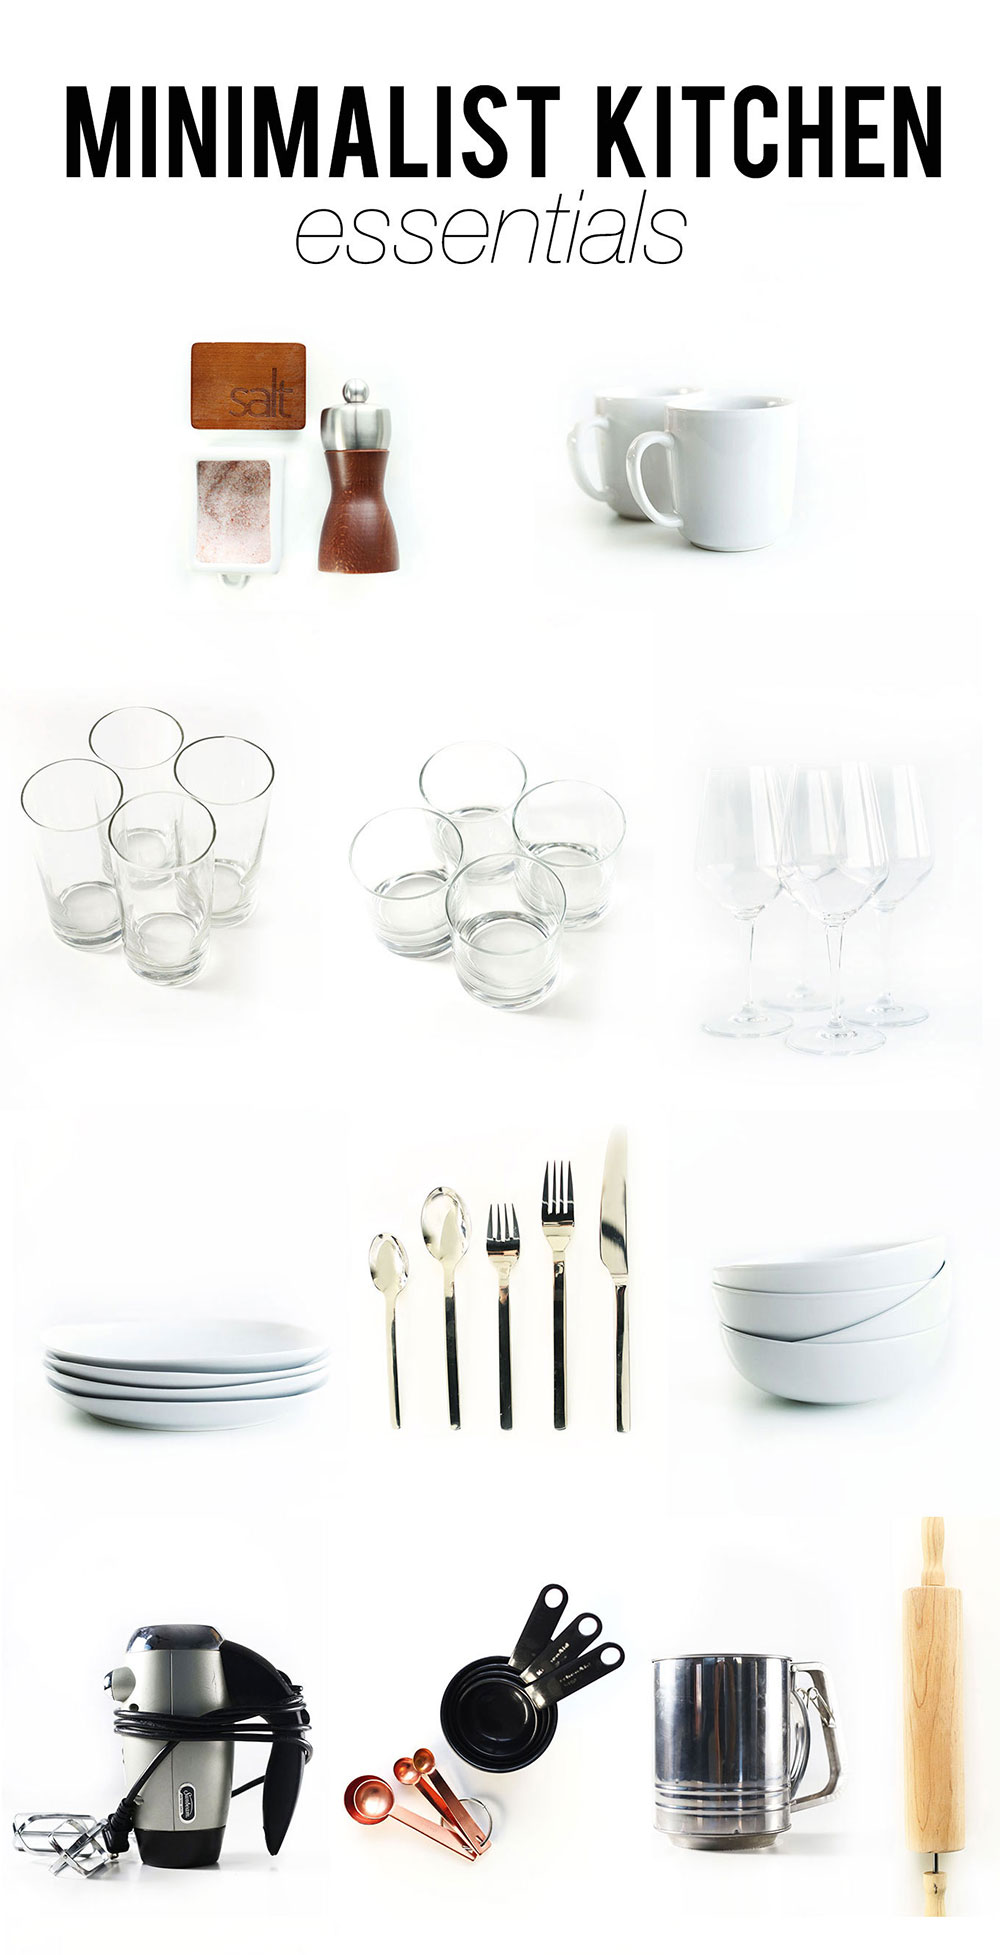 Our favorite items for a minimalist kitchen